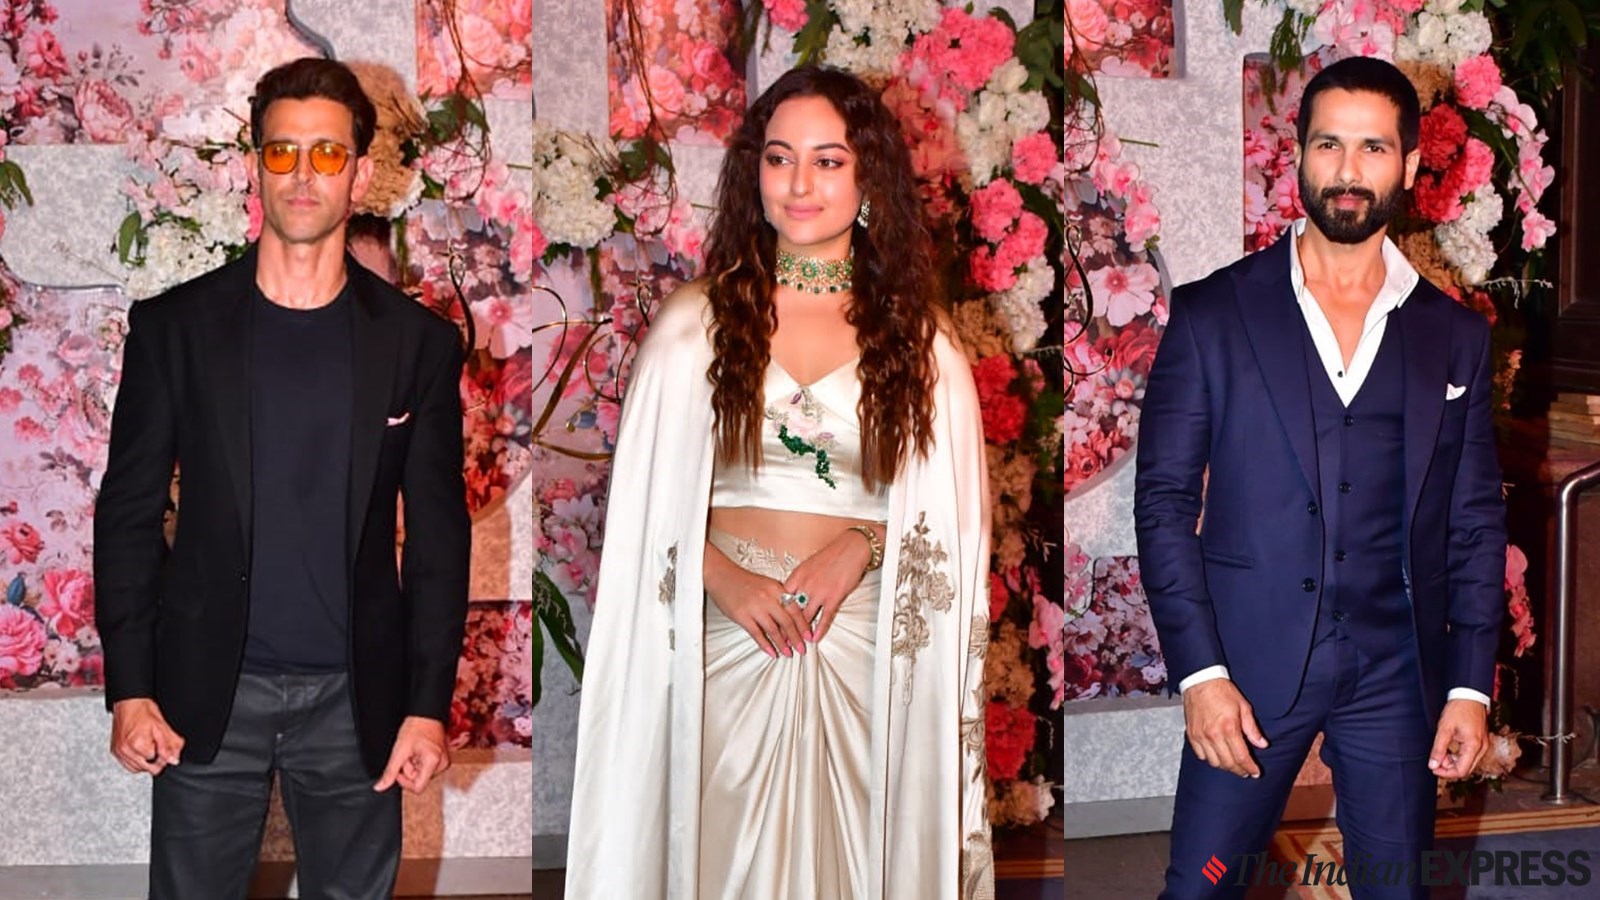 Sonakchi Xxx Full Hd Video - Bollywood stars Hrithik Roshan, Sonakshi Sinha, Shahid Kapoor and others,  attend reception party in glam avatars | Fashion News - The Indian Express